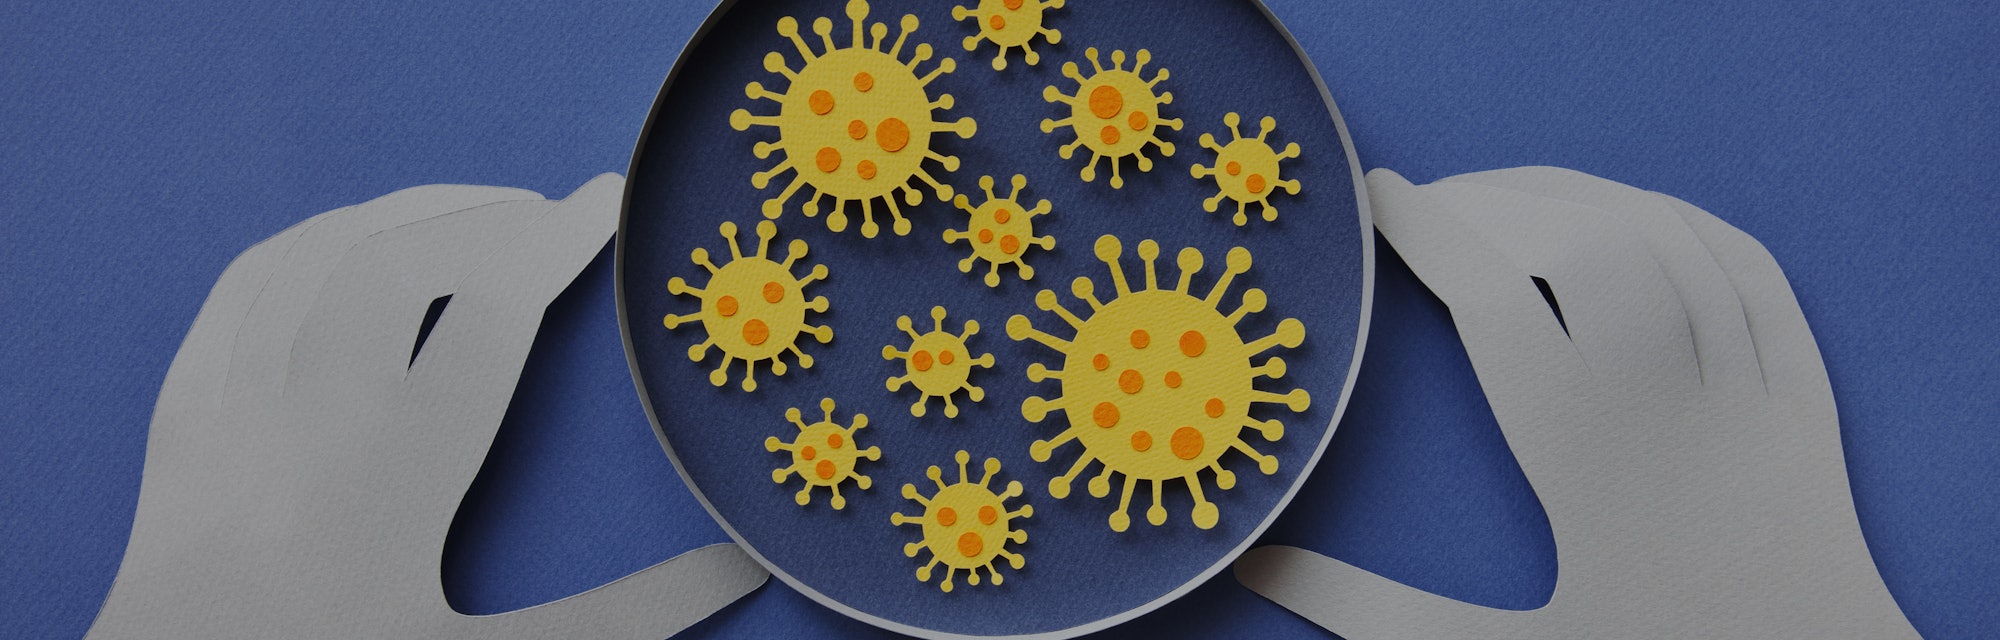 Over the past two years, science has taught us a lot about the novel coronavirus.